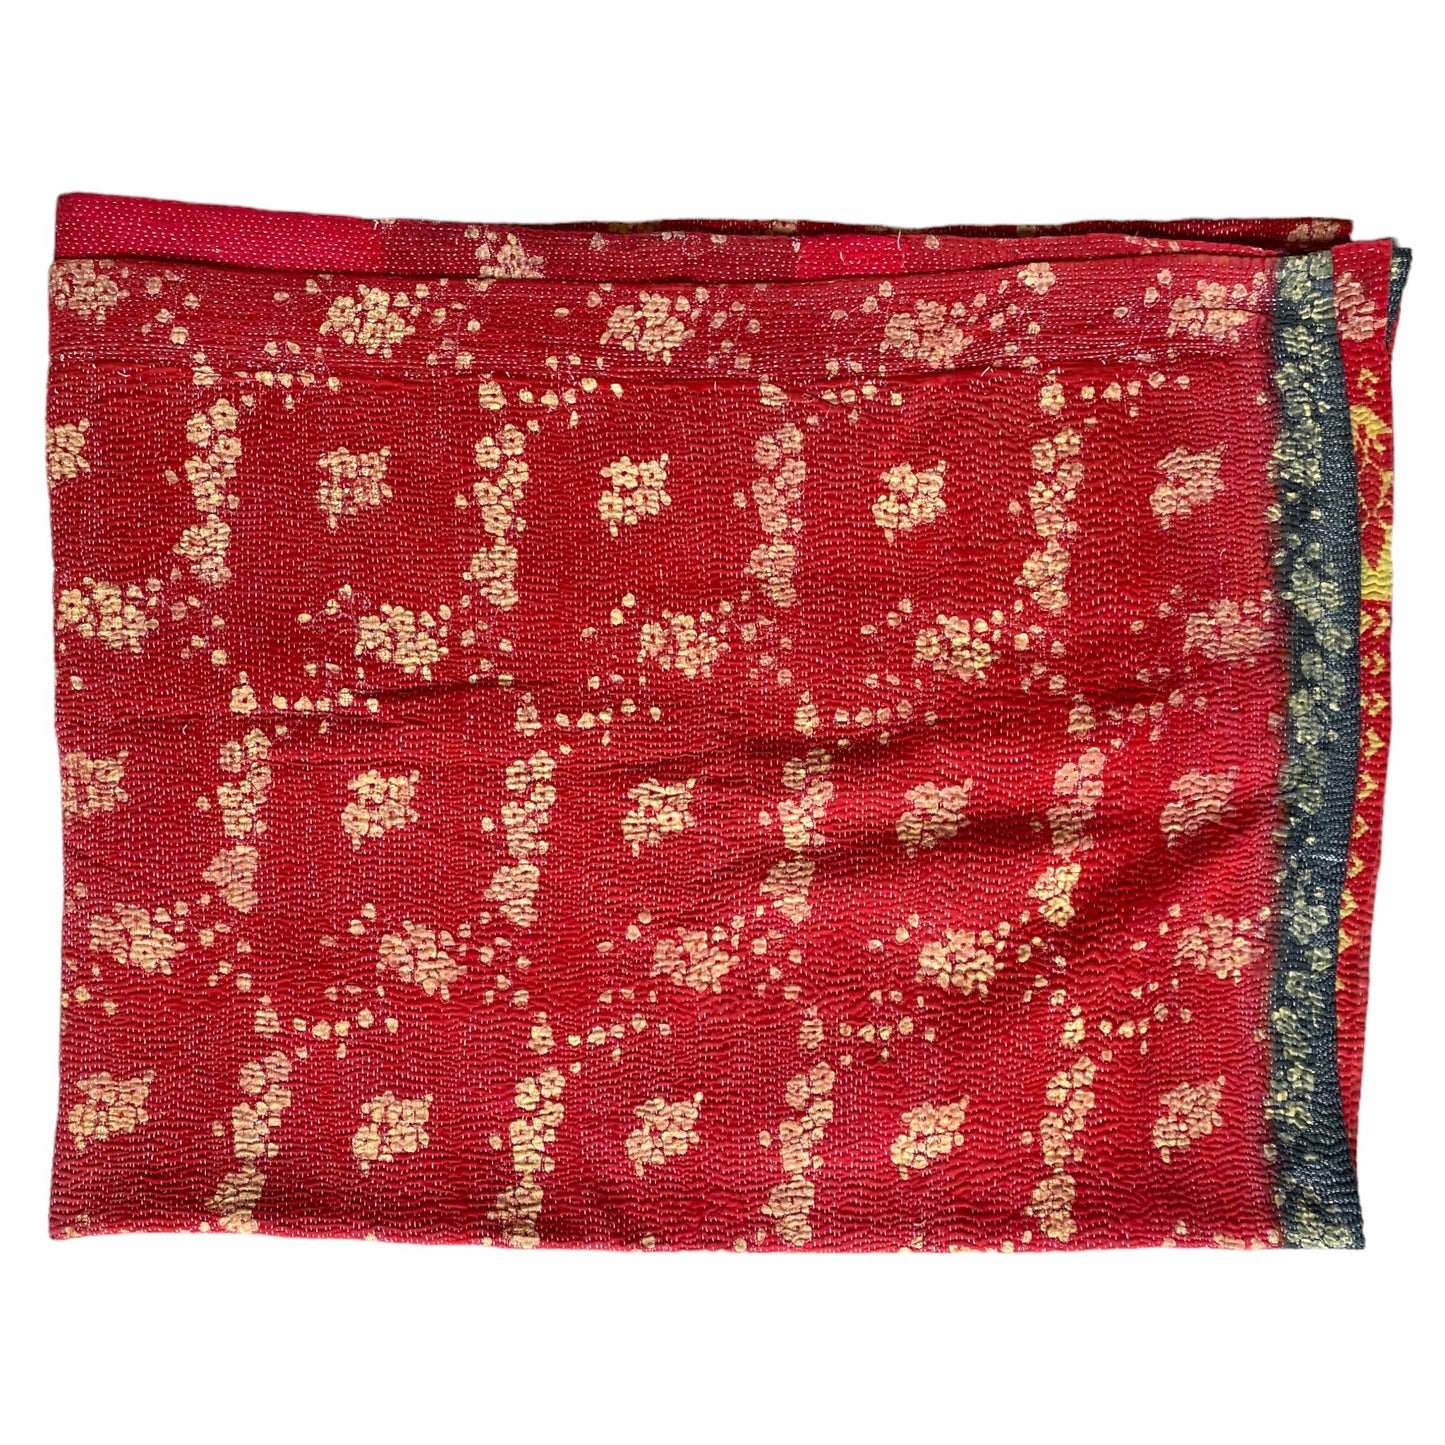 Vintage red and yellow kantha quilt